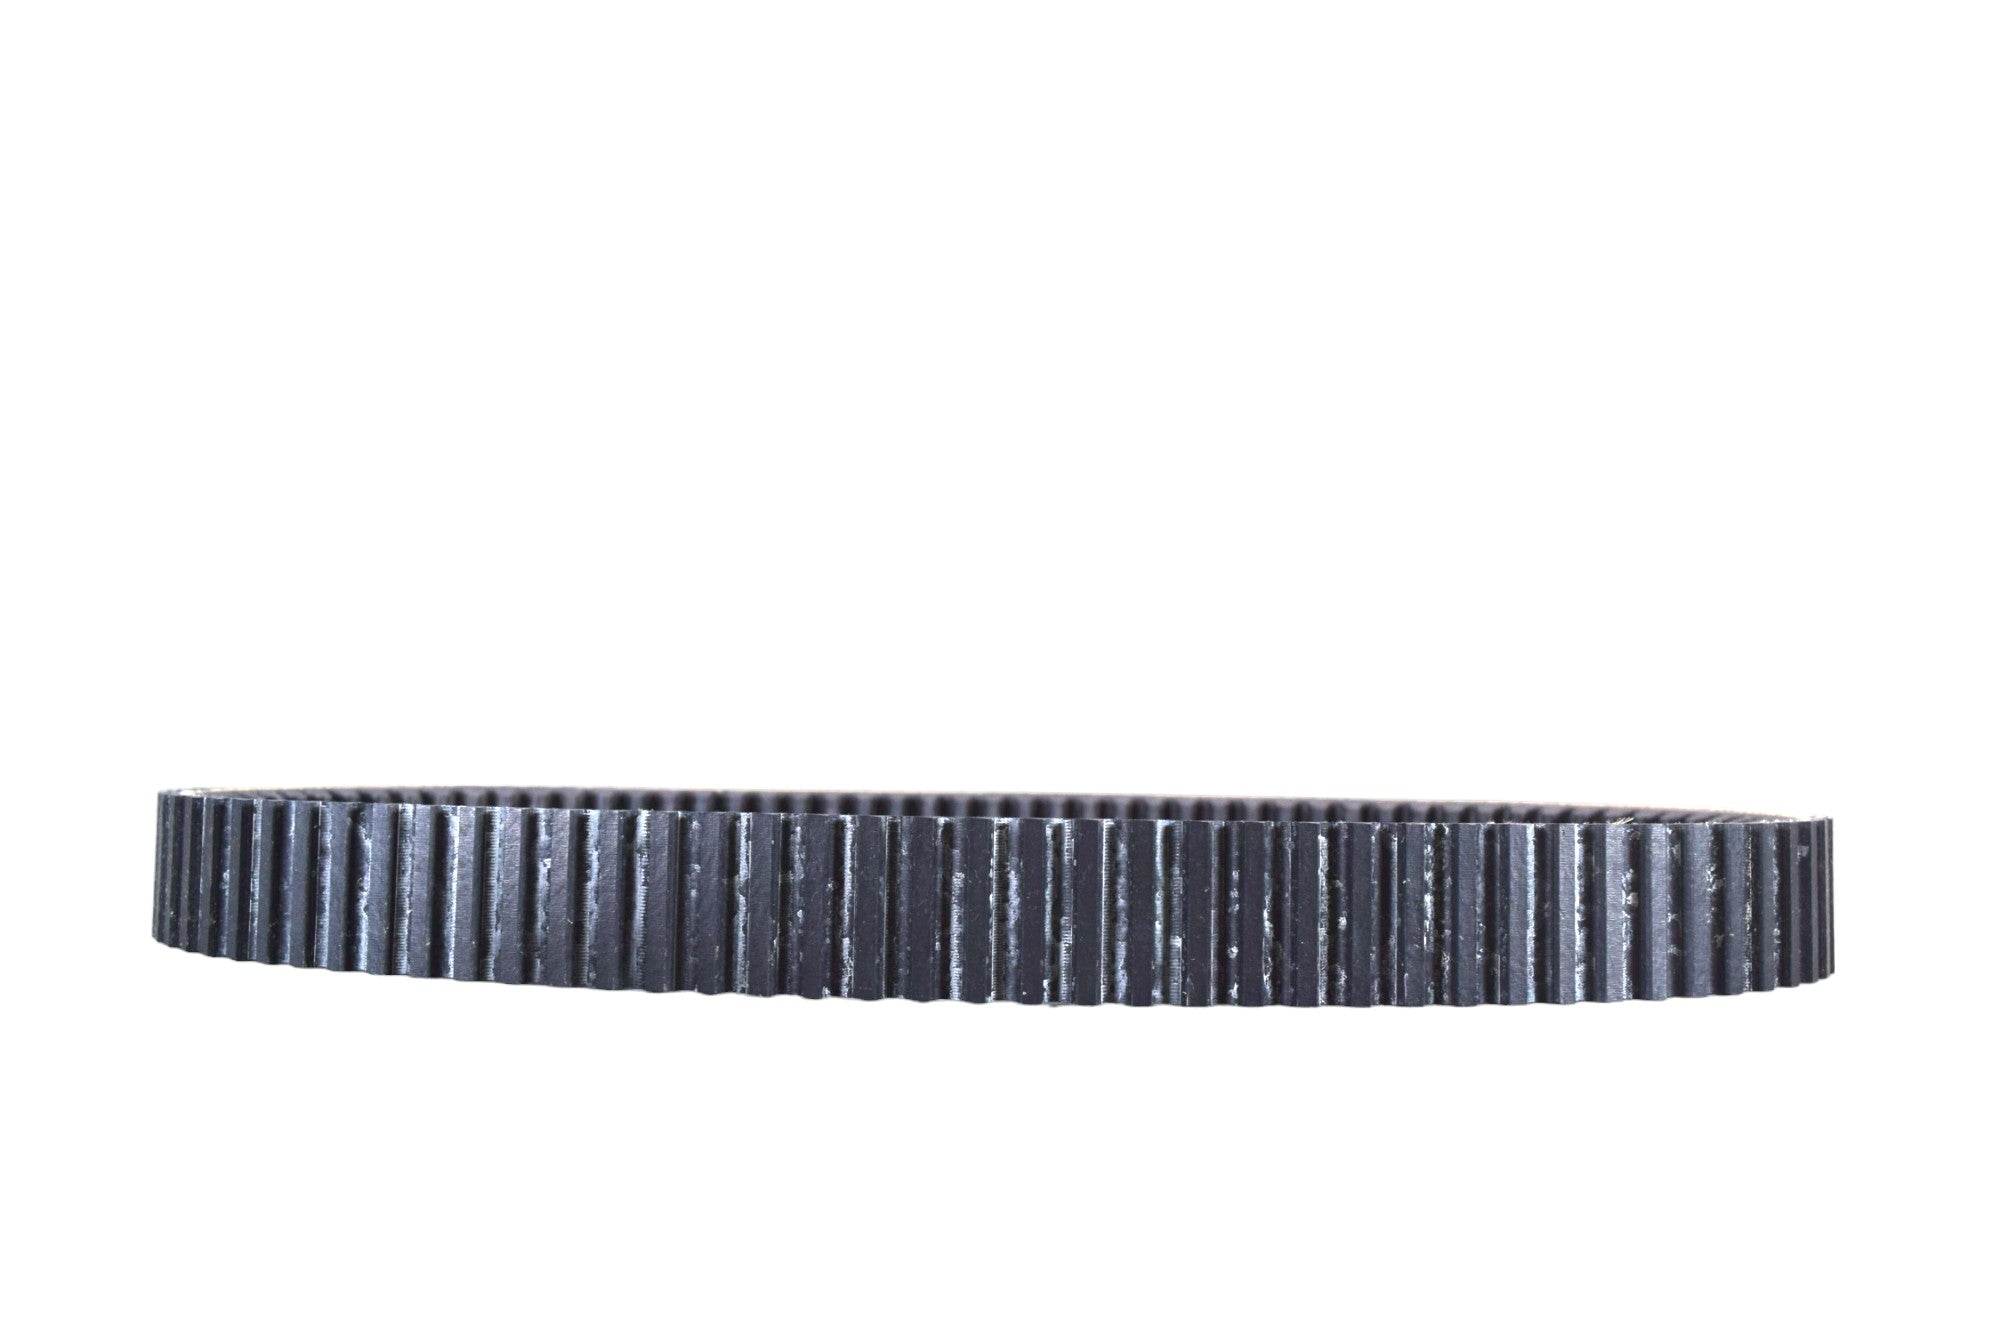 Ultimax UXP419 Drive Belt for Can-Am and Bombardier OEM Replacement for 715900030 (Made in USA)